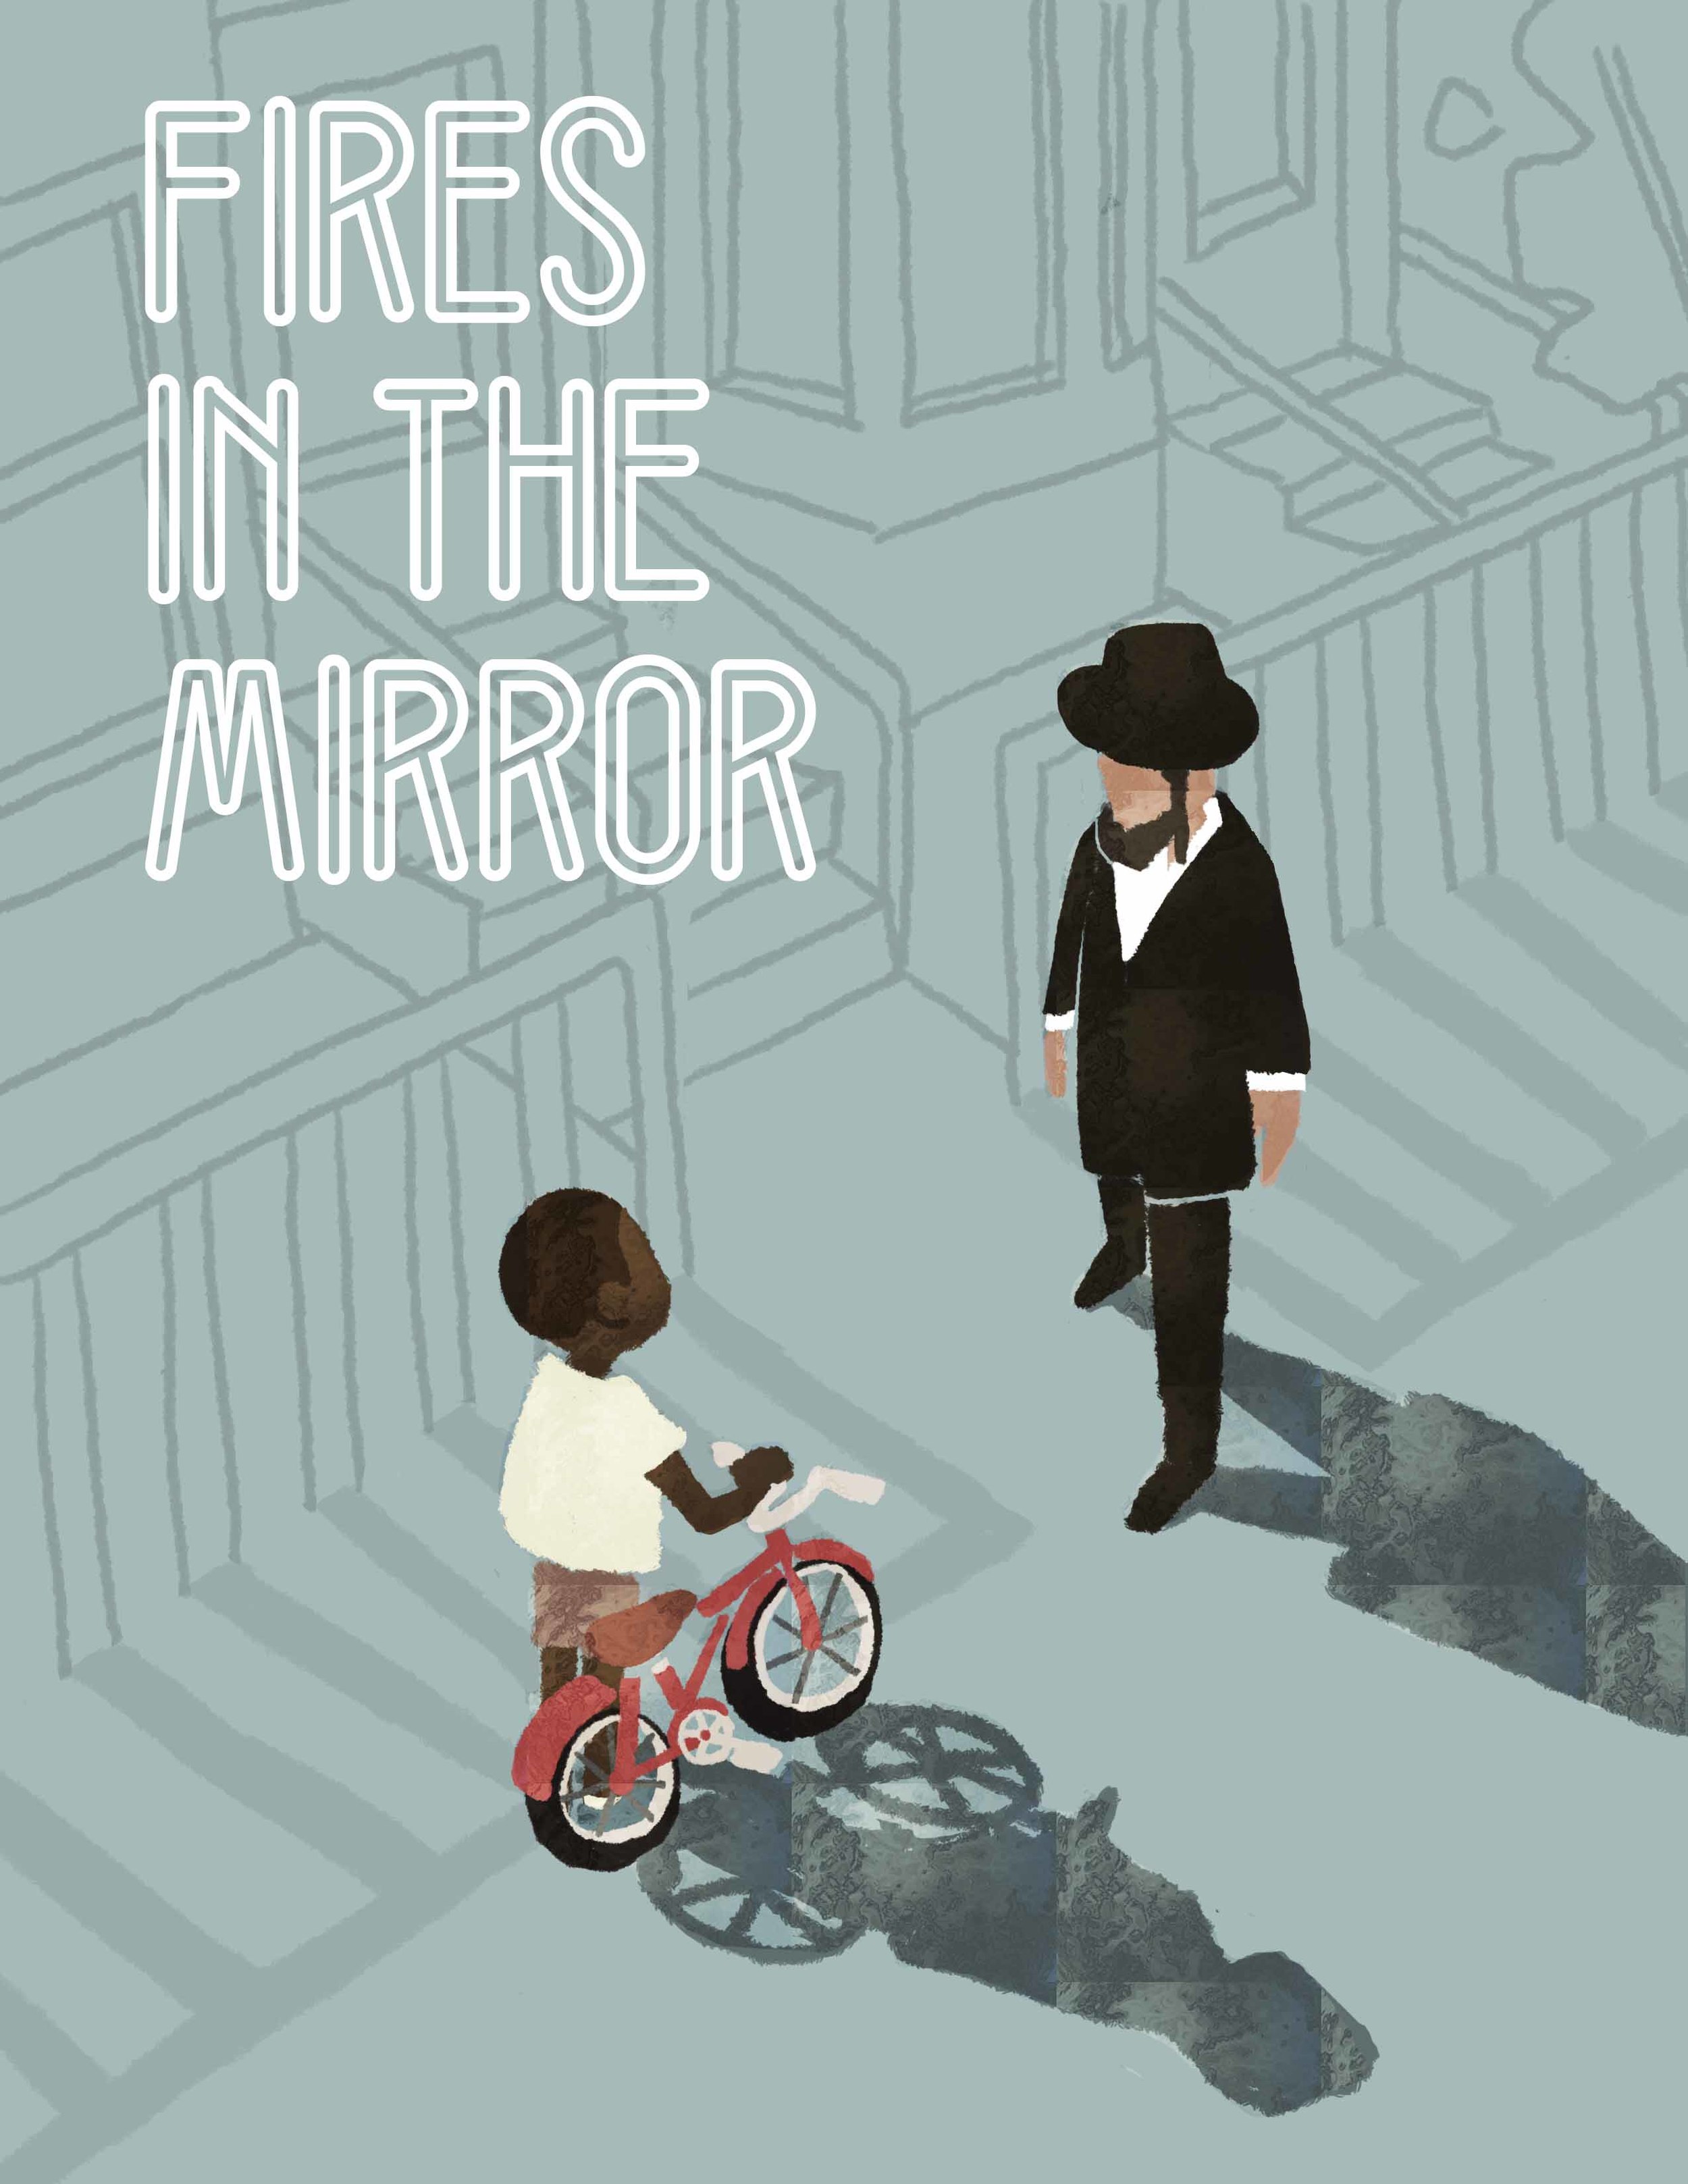  2016 SCHOLASTIC CALIFORNIA REGIONAL AWARDS-GOLD KEY WINNER  Poster design for  Fires in the Mirror , a play about the Crown Heights riots, a series of racial and ethnic clashes between the black community and the Hadisim population in 1991 Brooklyn.